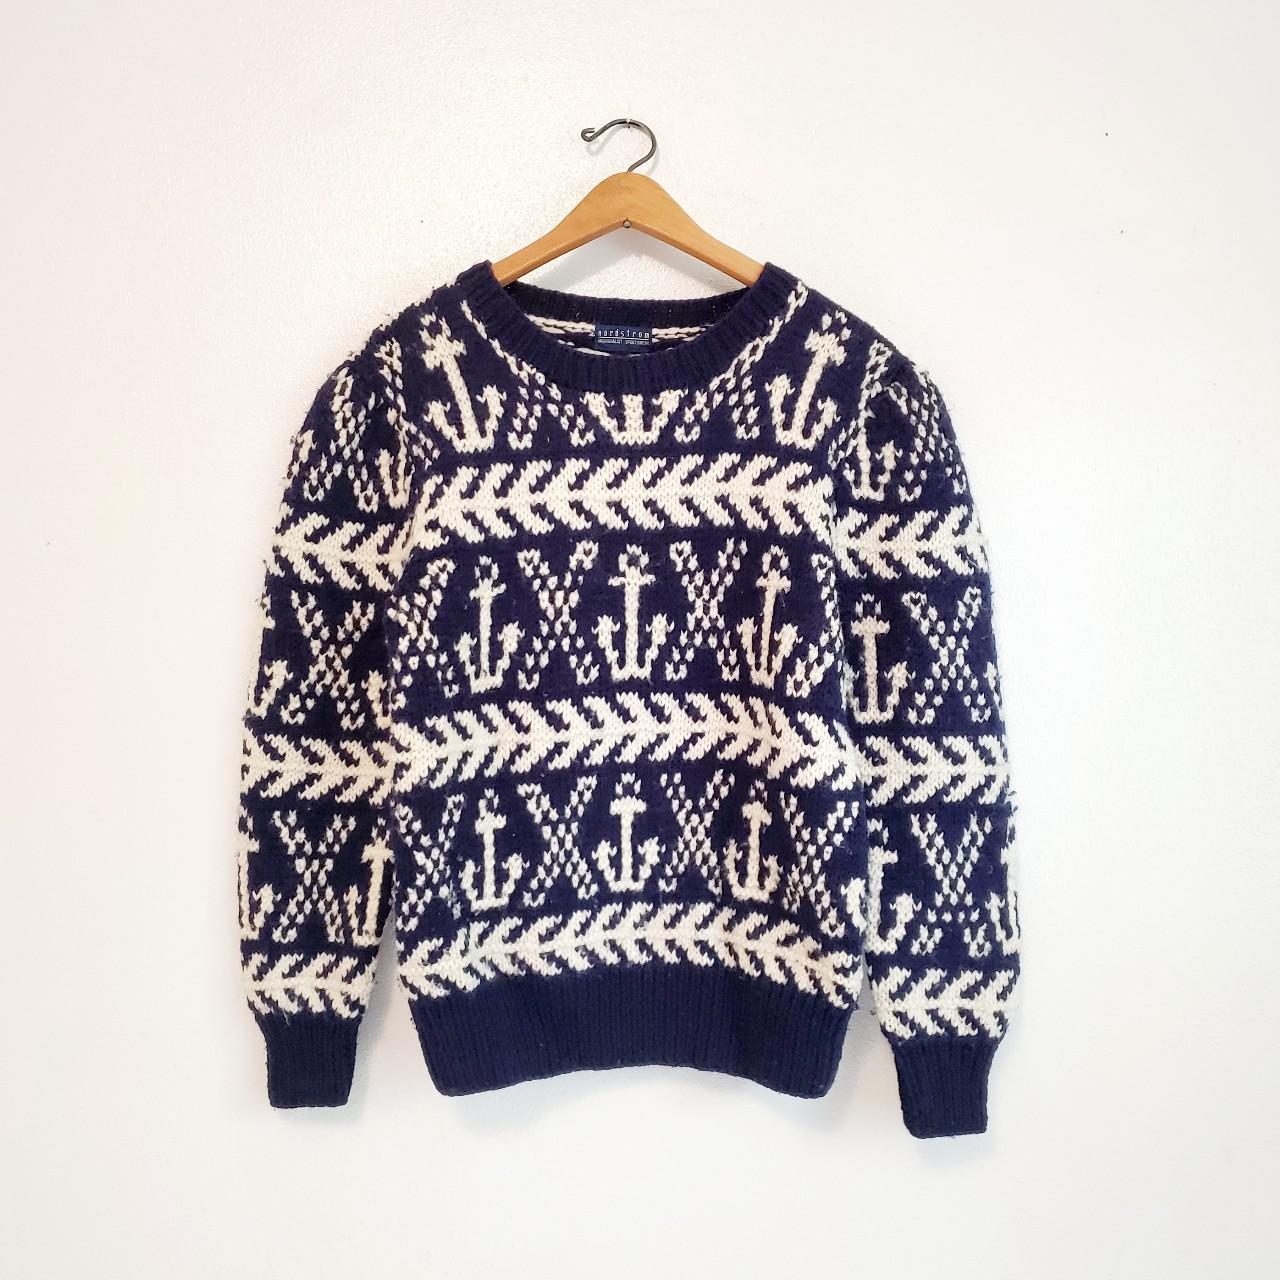 Product Image 1 - Fair Isle Wool Sweater
Anchor print

Vintage